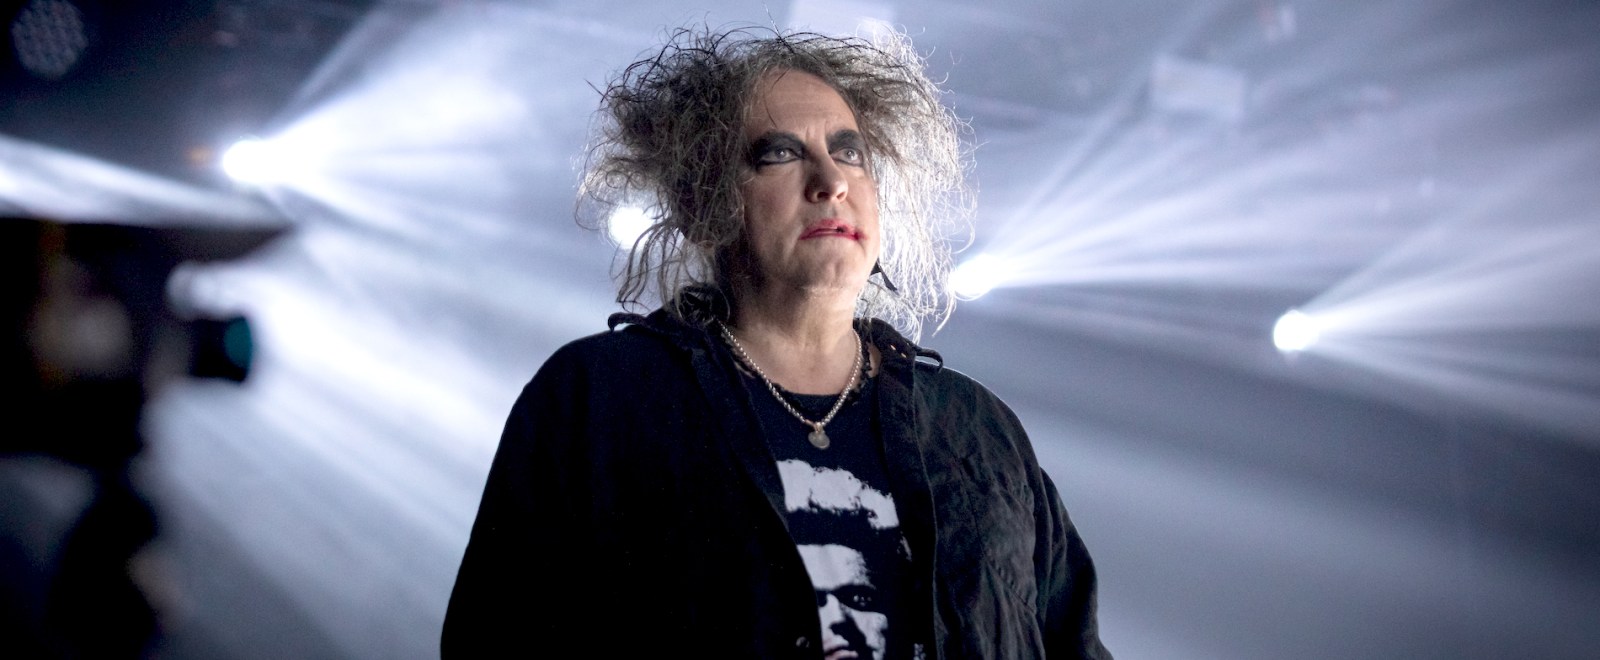 Robert Smith The Cure 2022